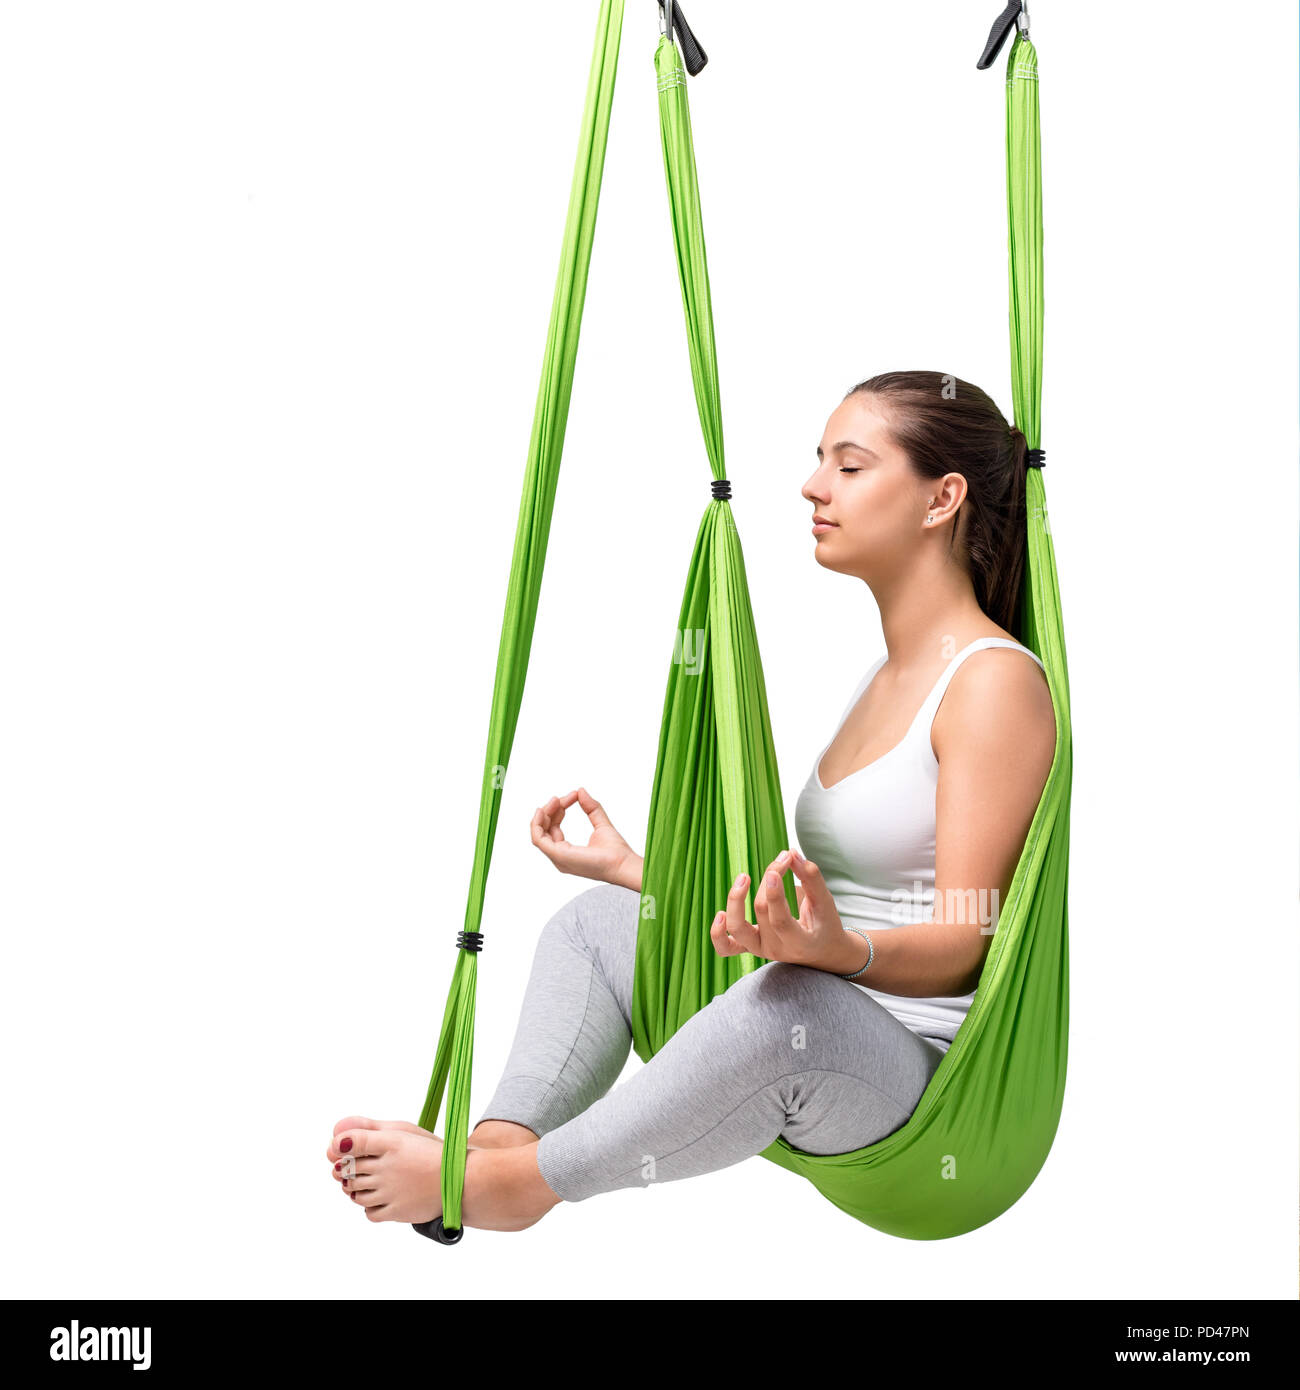 Portrait of young woman doing aerial yoga. Girl sitting with eyes closed in green antigravity yoga hammock isolated on white background. Stock Photo